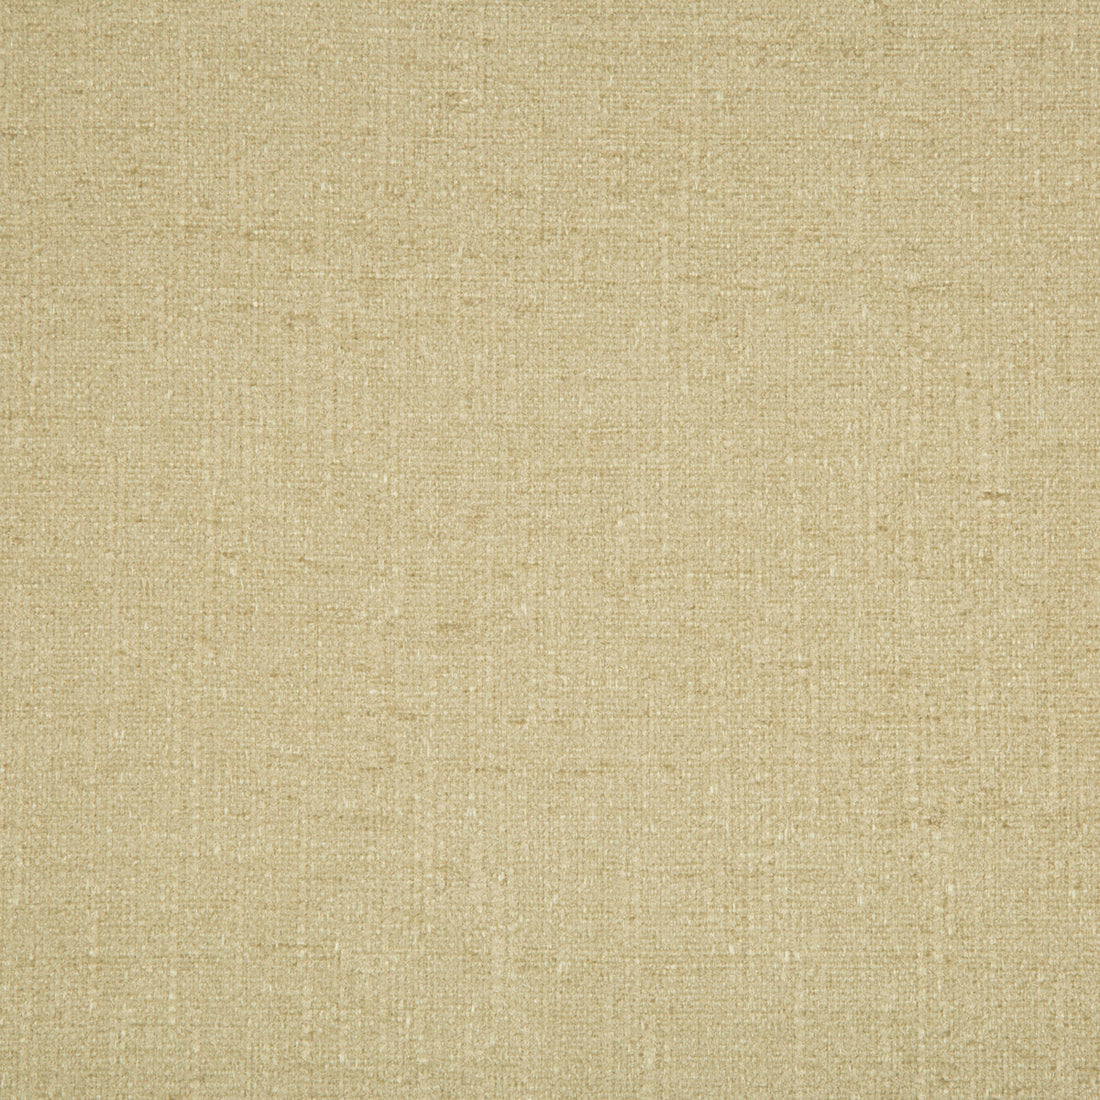 Kravet Contract fabric in 34636-16 color - pattern 34636.16.0 - by Kravet Contract in the Crypton Incase collection